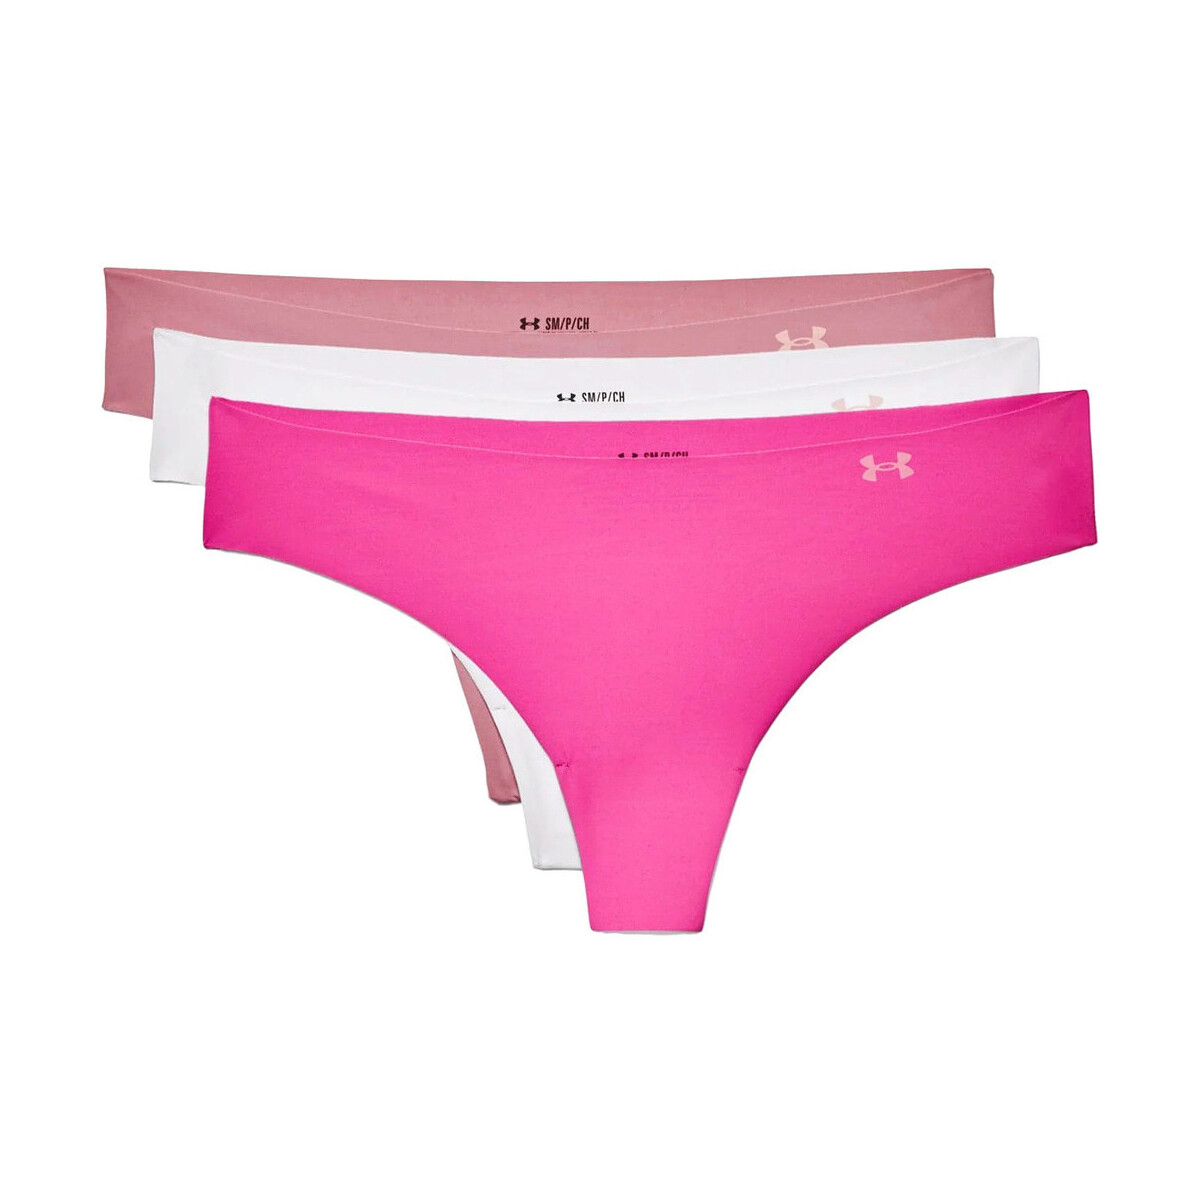 textil Mujer Sudaderas Under Armour PS Thong 3Pack Rosa